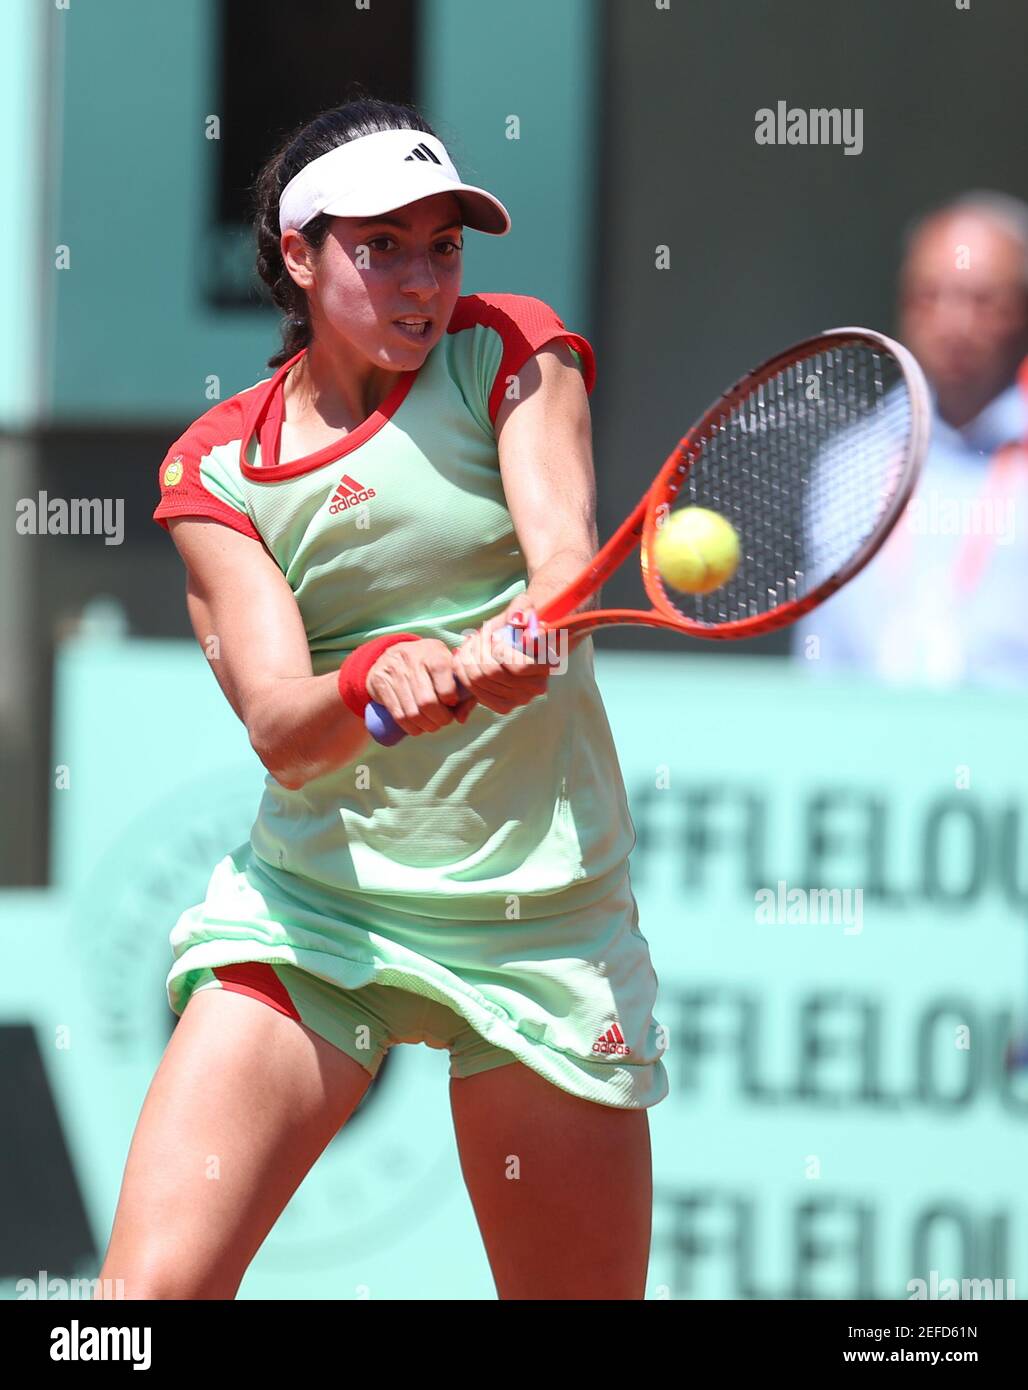 Tennis - French Open - Roland Garros, Paris, France - 2/6/12 Women's  Singles - USA's Christina Mchale during her third round match Mandatory  Credit: Action Images / Paul Childs Stock Photo - Alamy